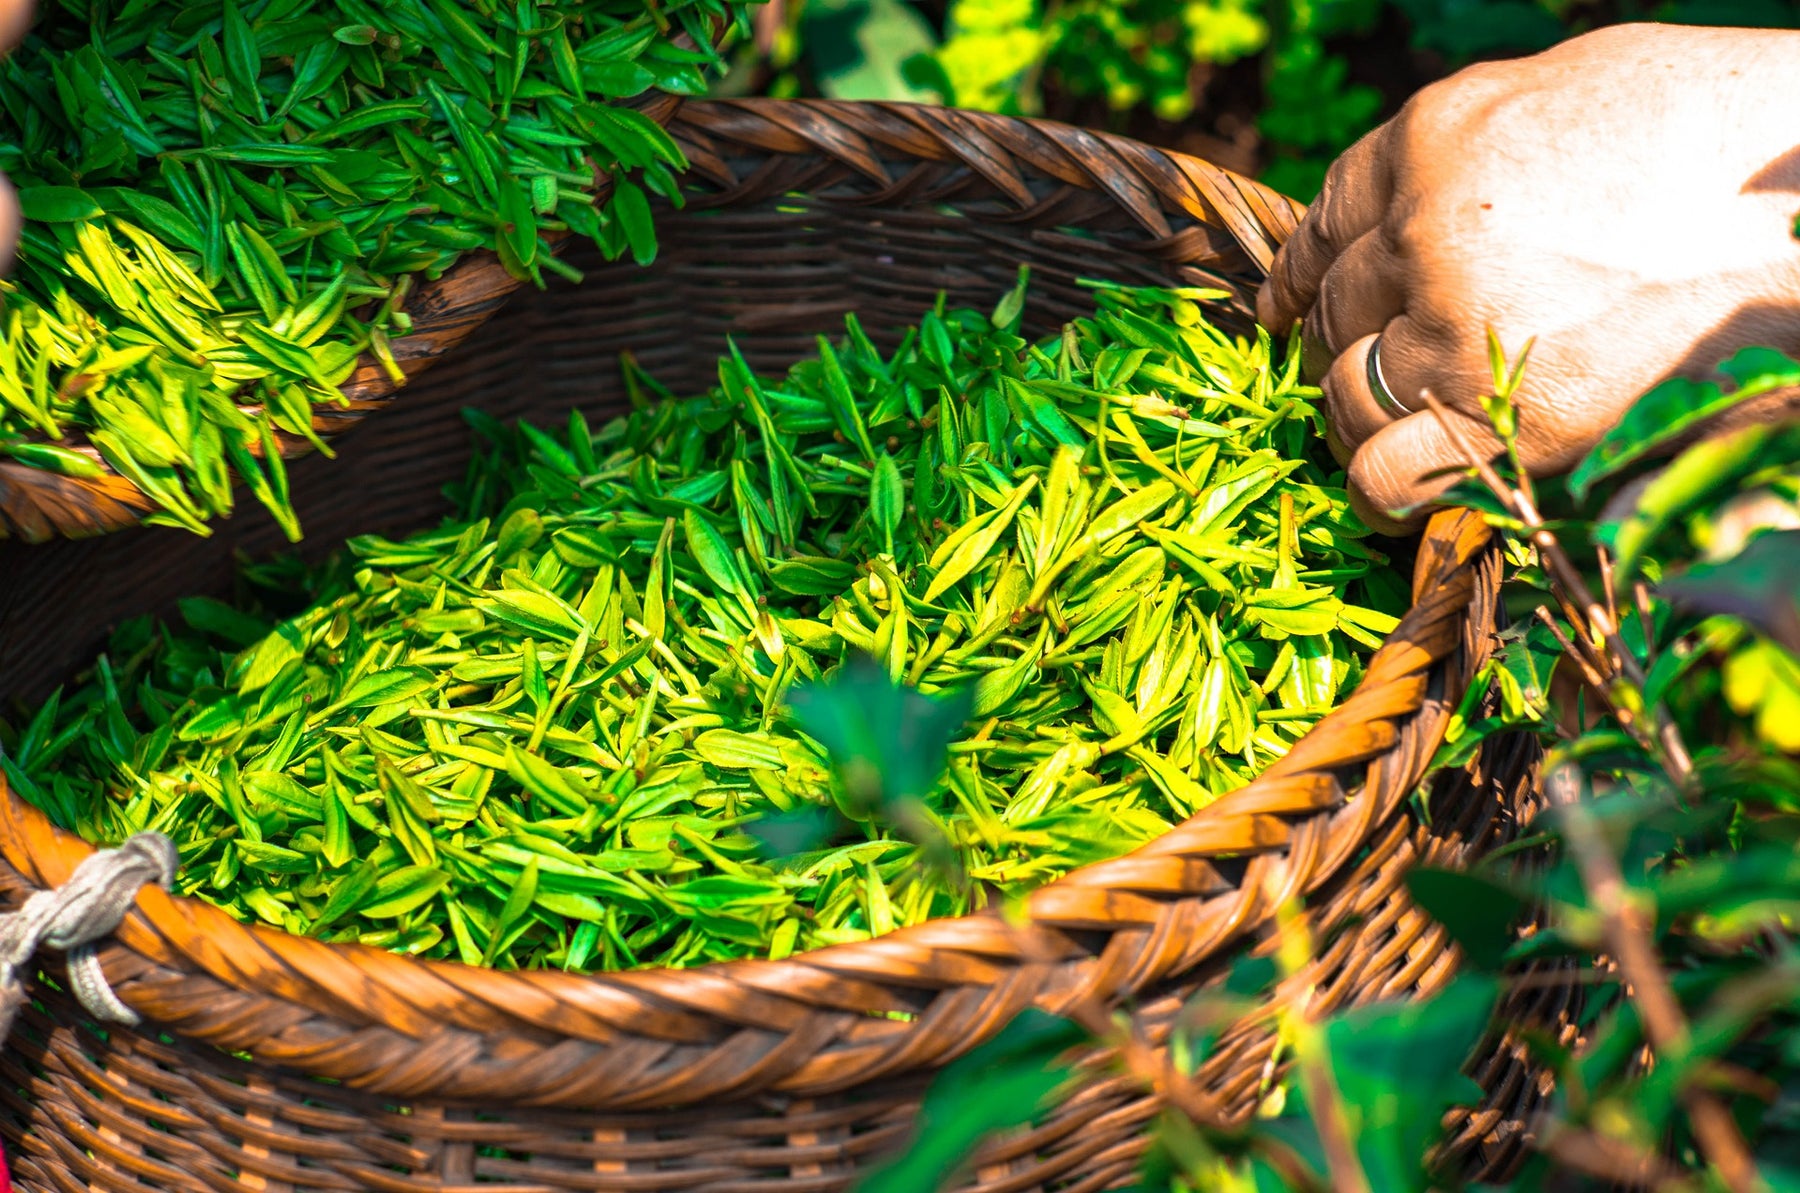 The Benefits of Drinking Green Tea